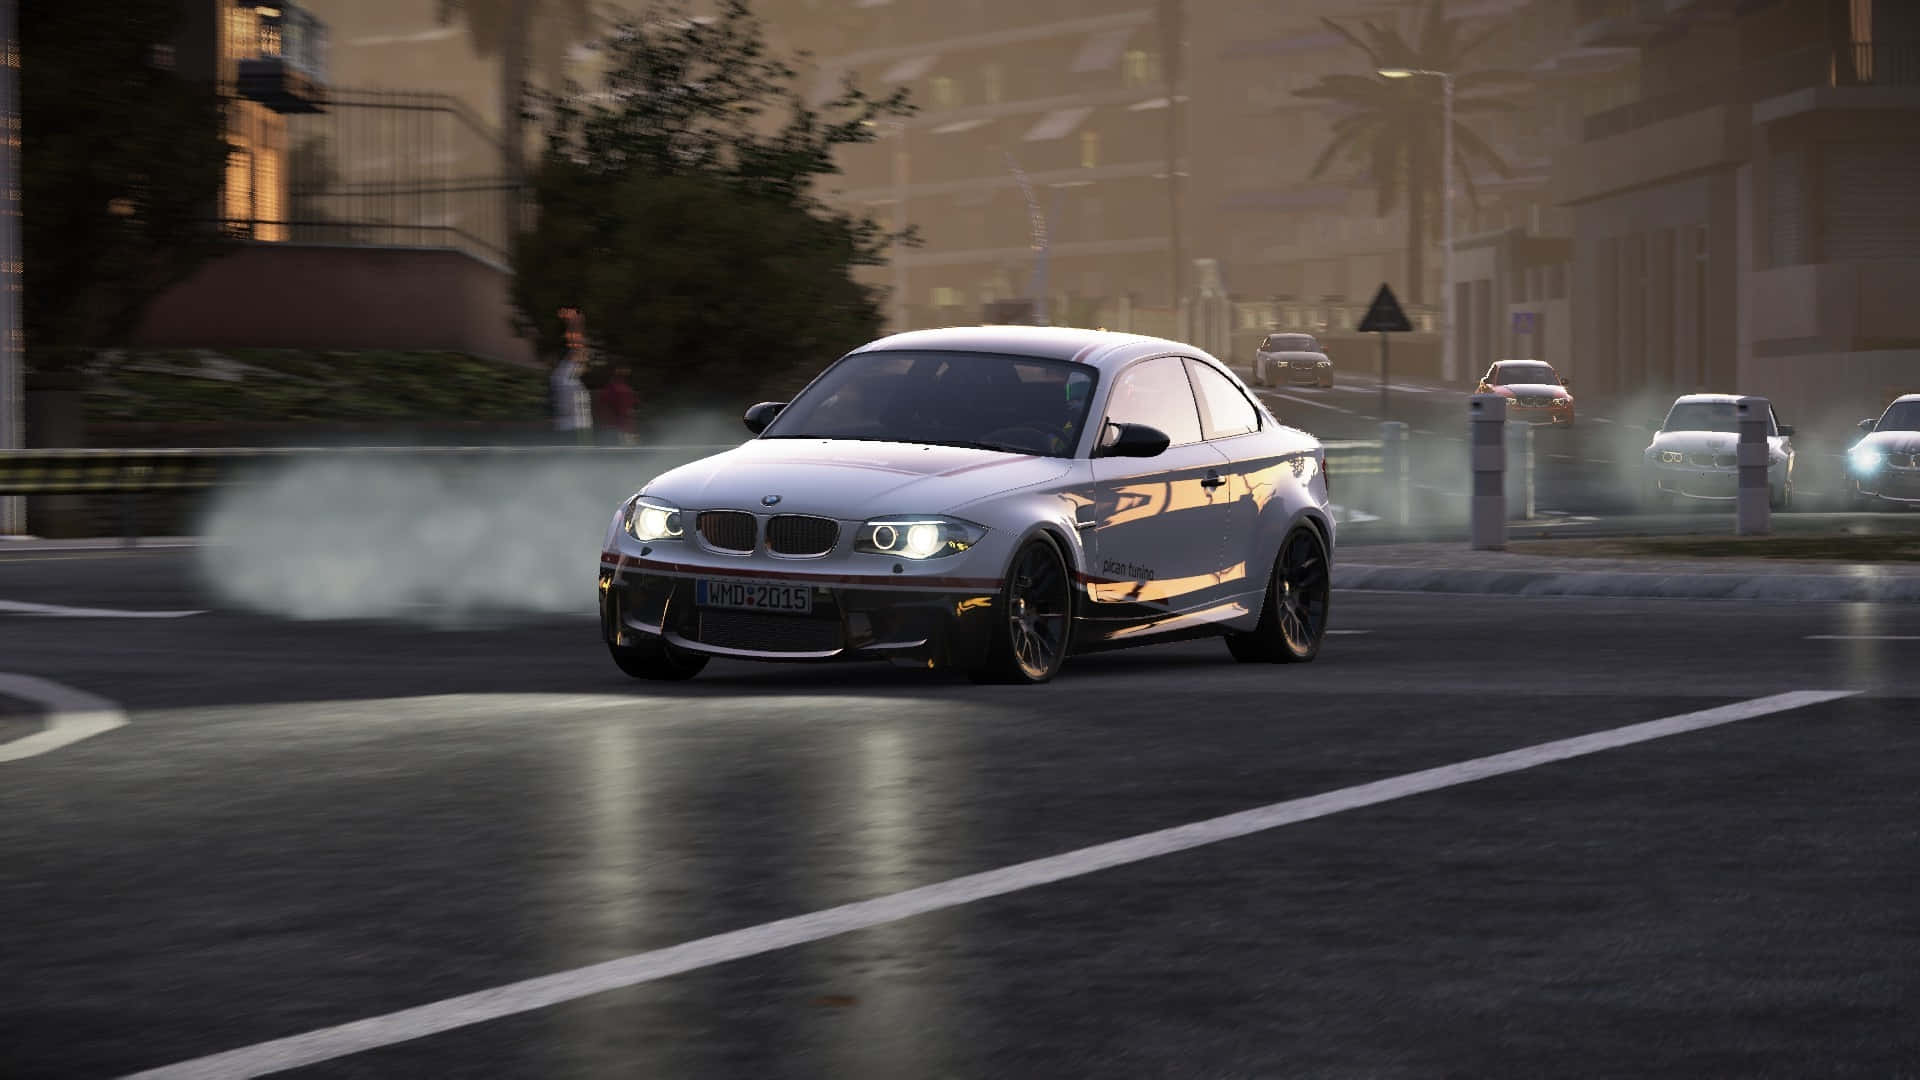 Hd Project Cars BMW E46 M3 Background